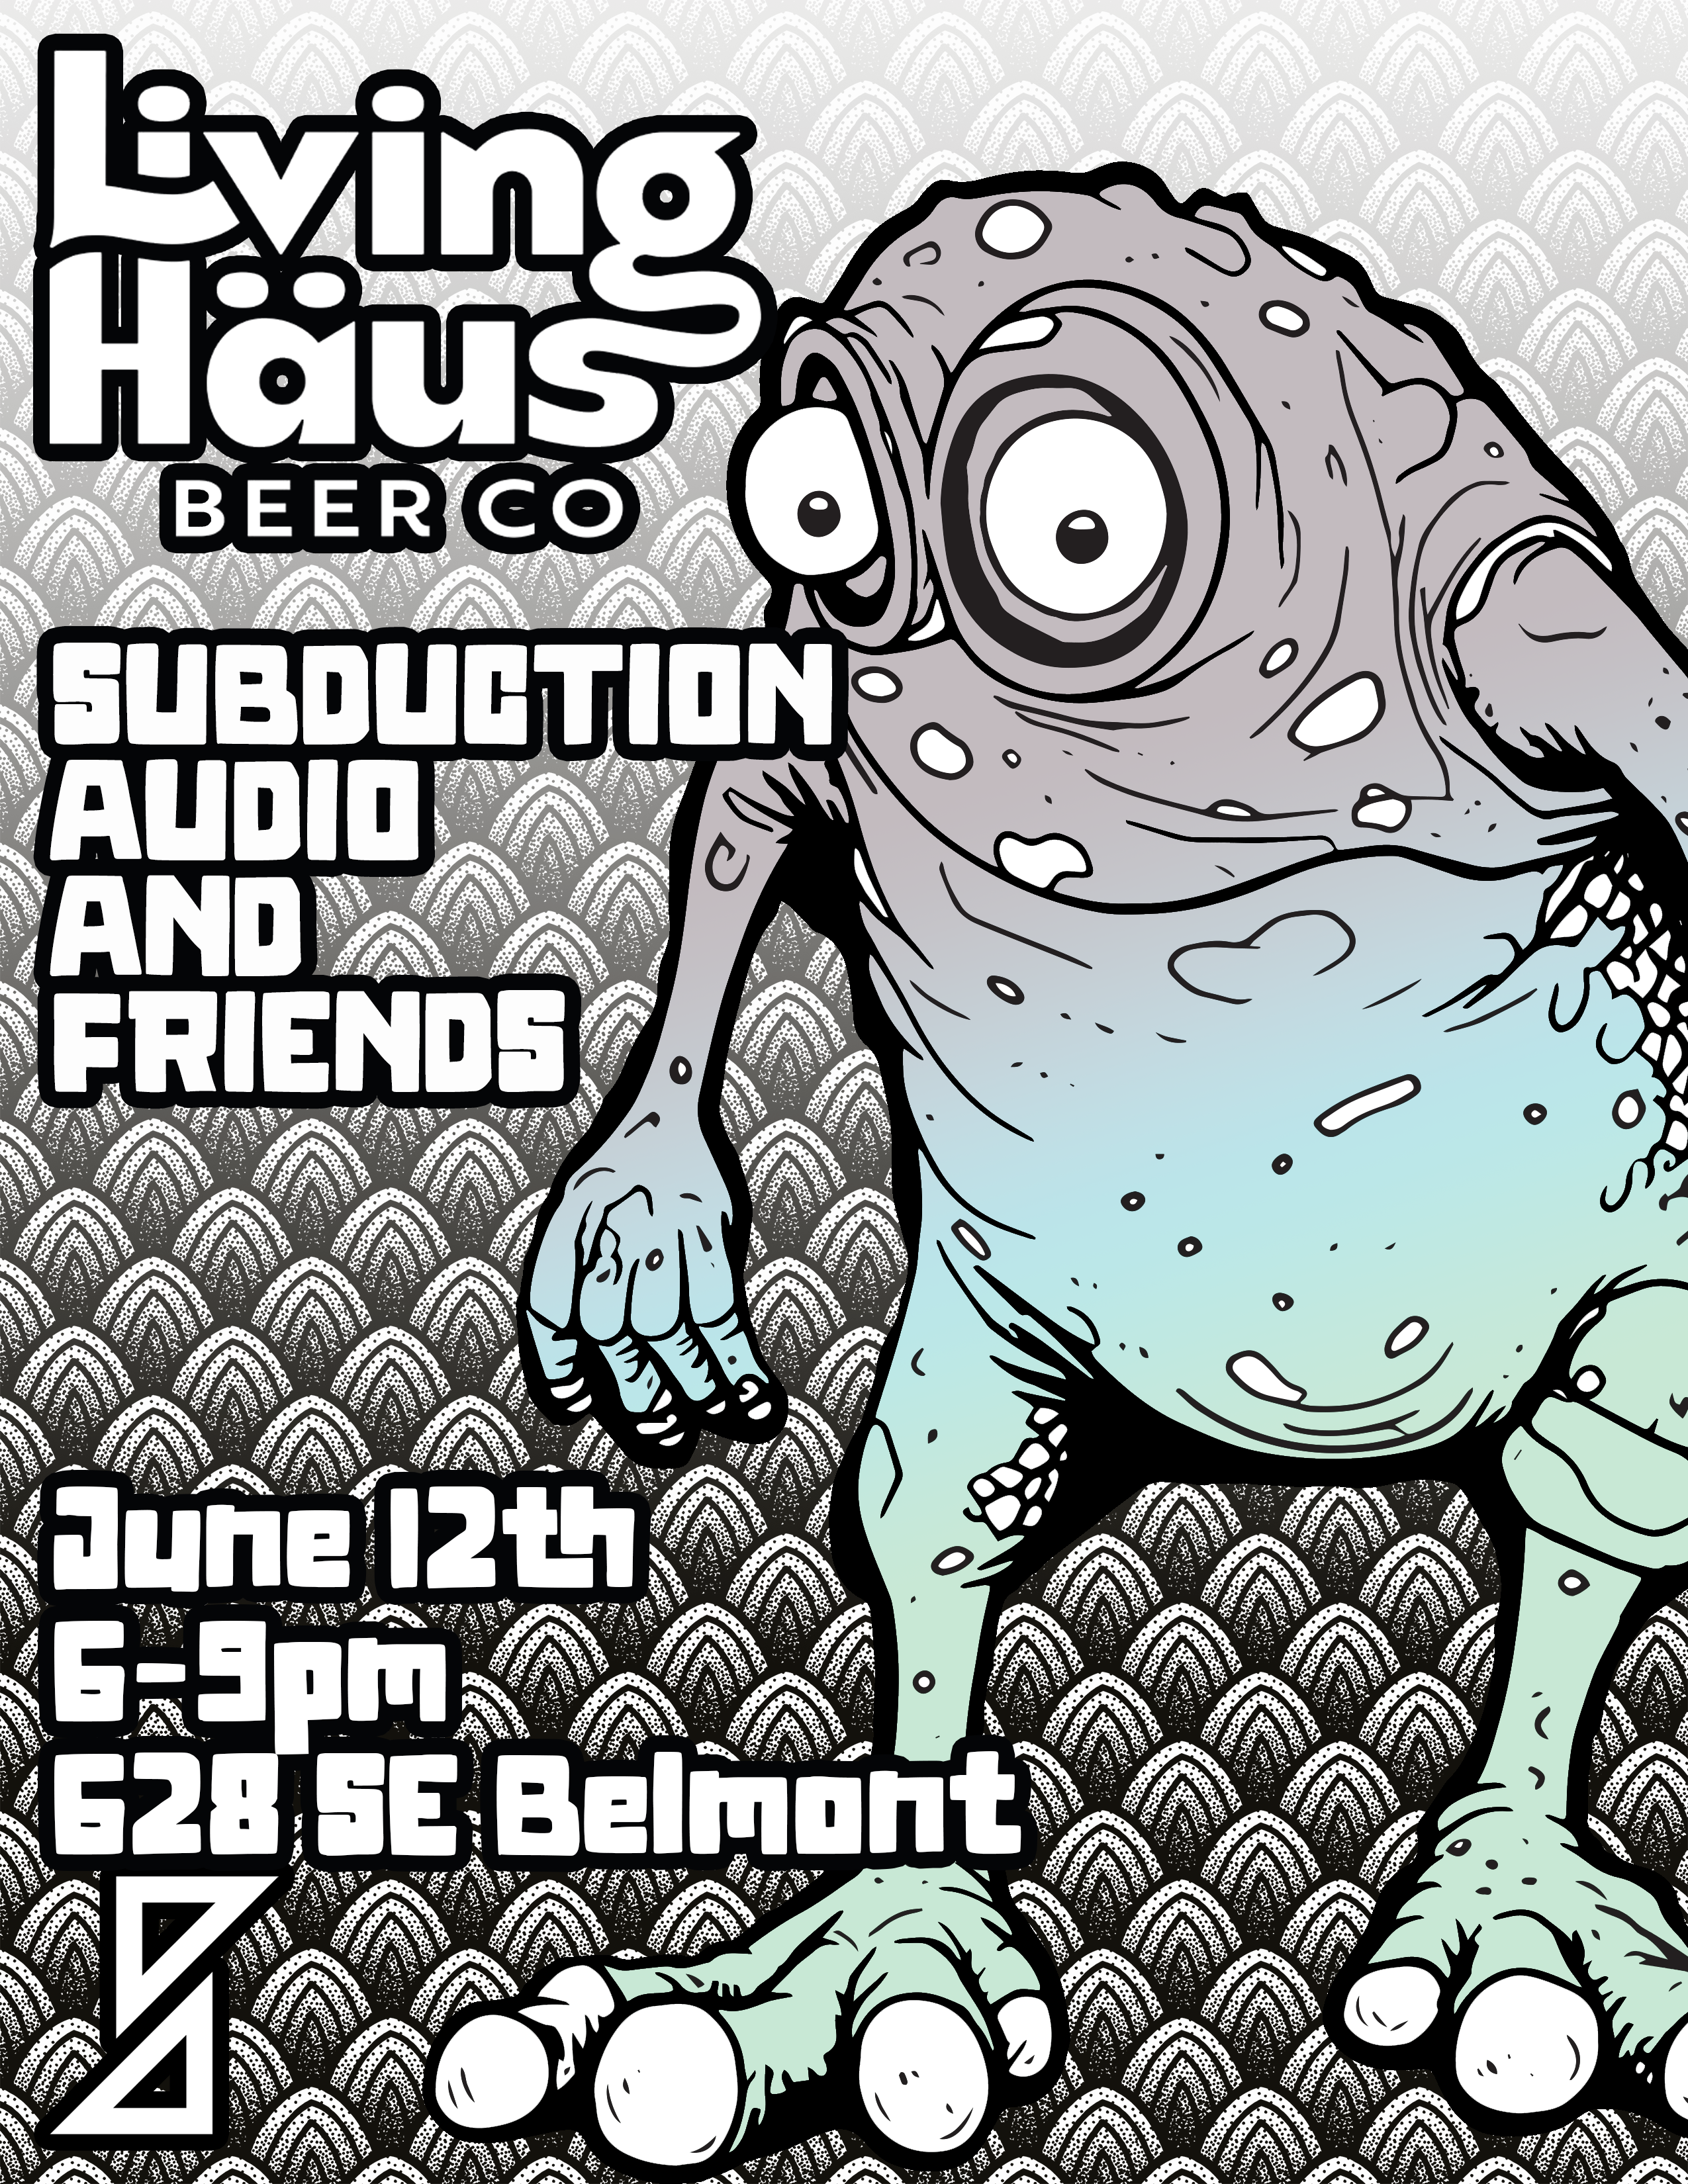 Subduction Audio and Friends 10